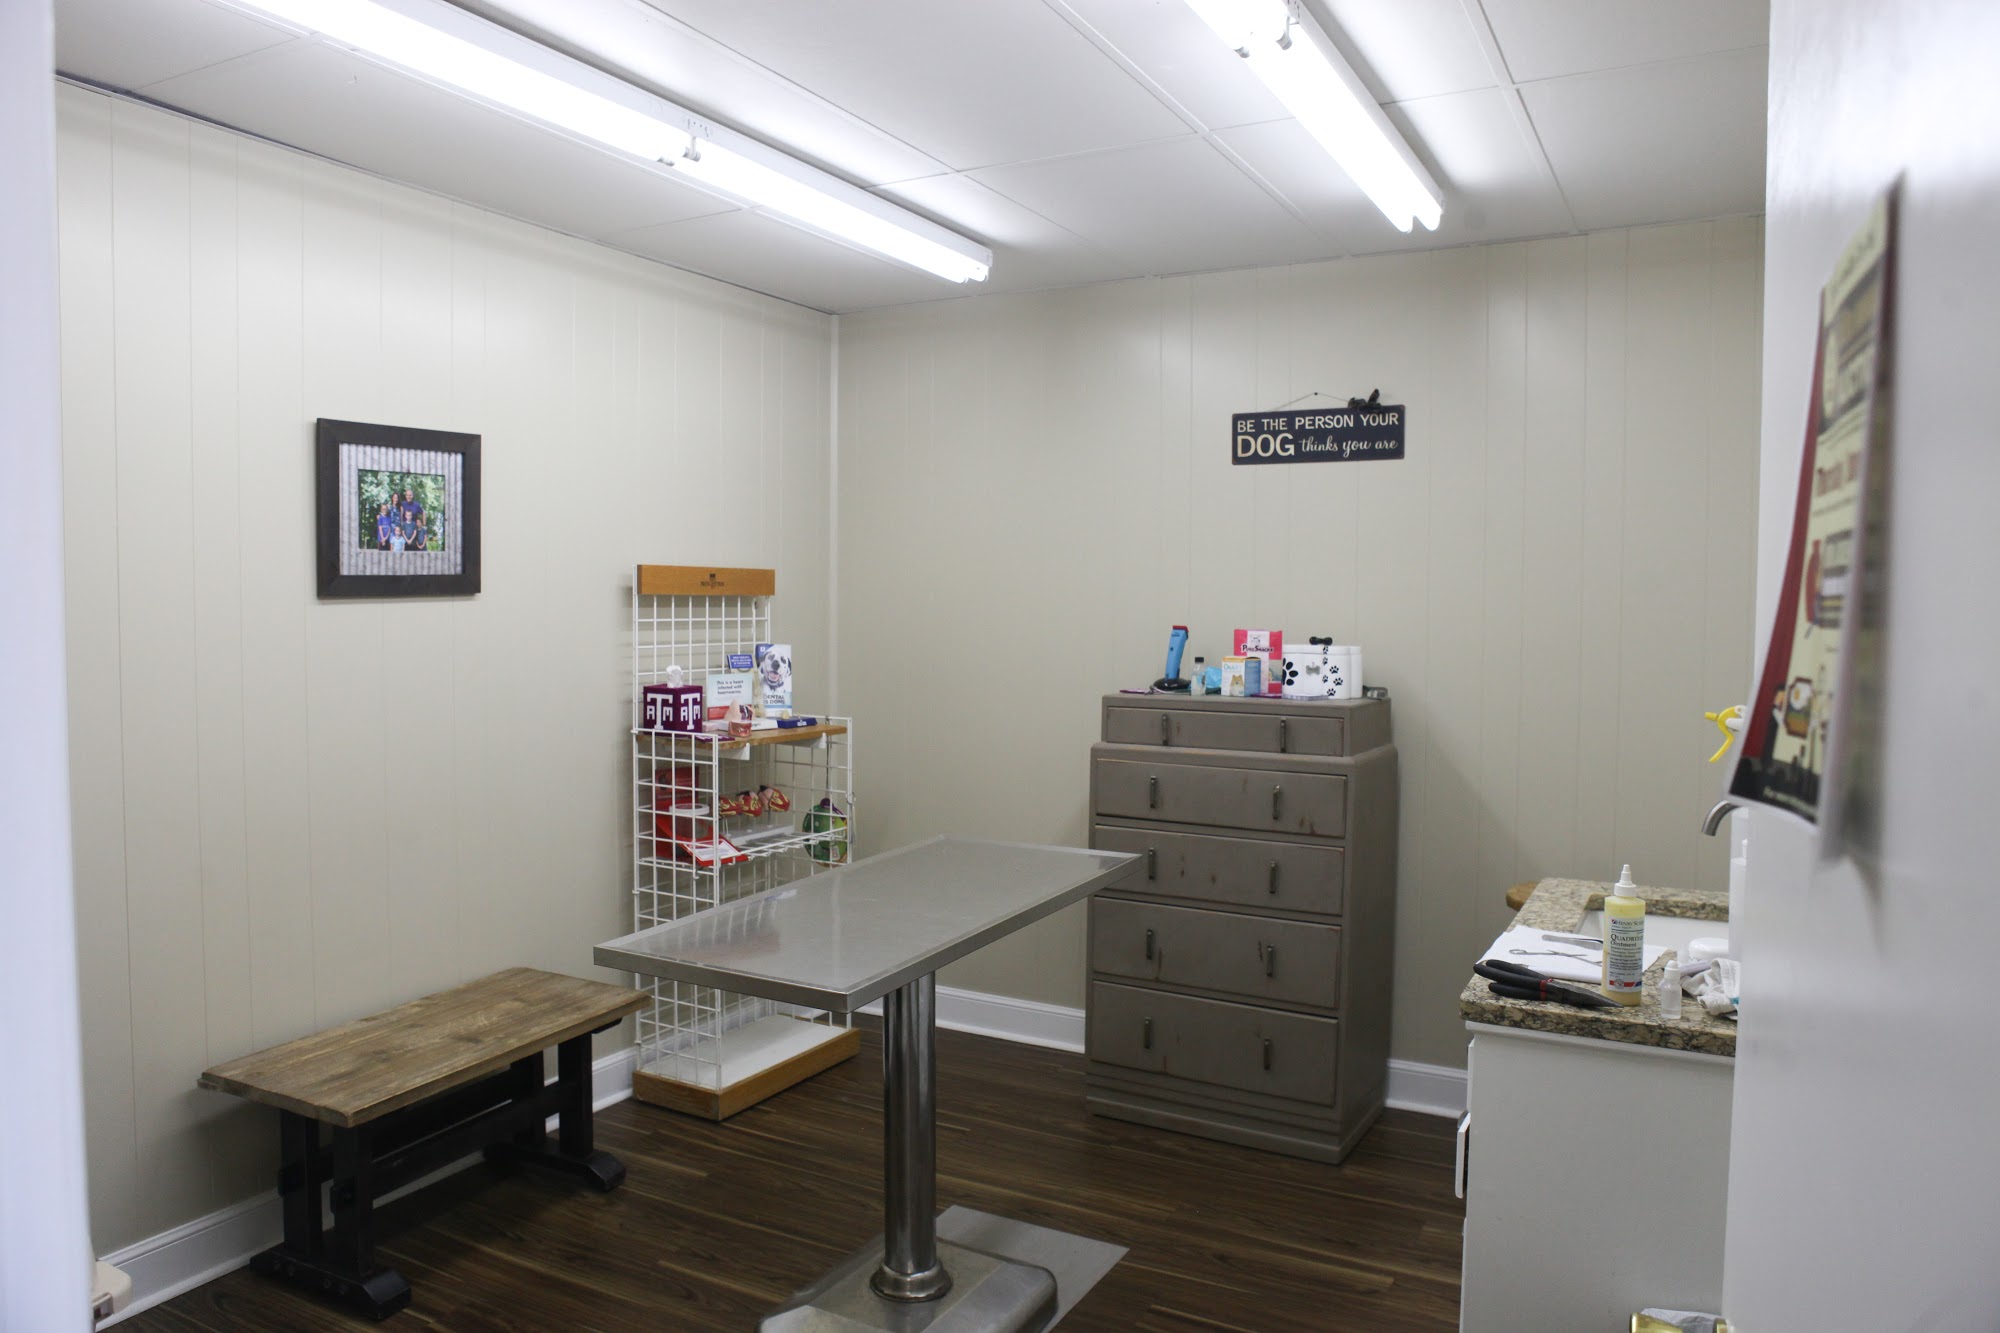 Brookhollow Animal Clinic